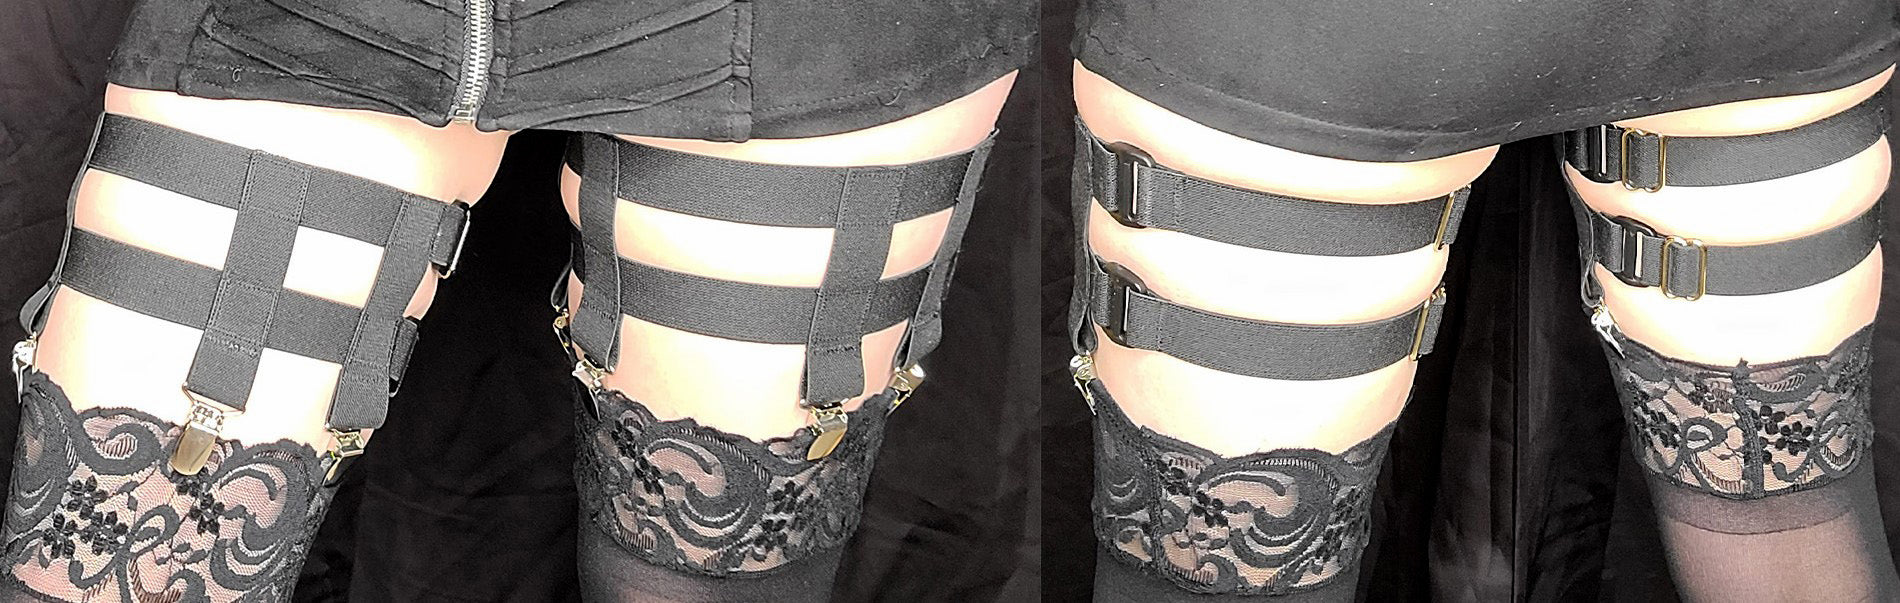 4-Clip Garters with 2 Leg Straps